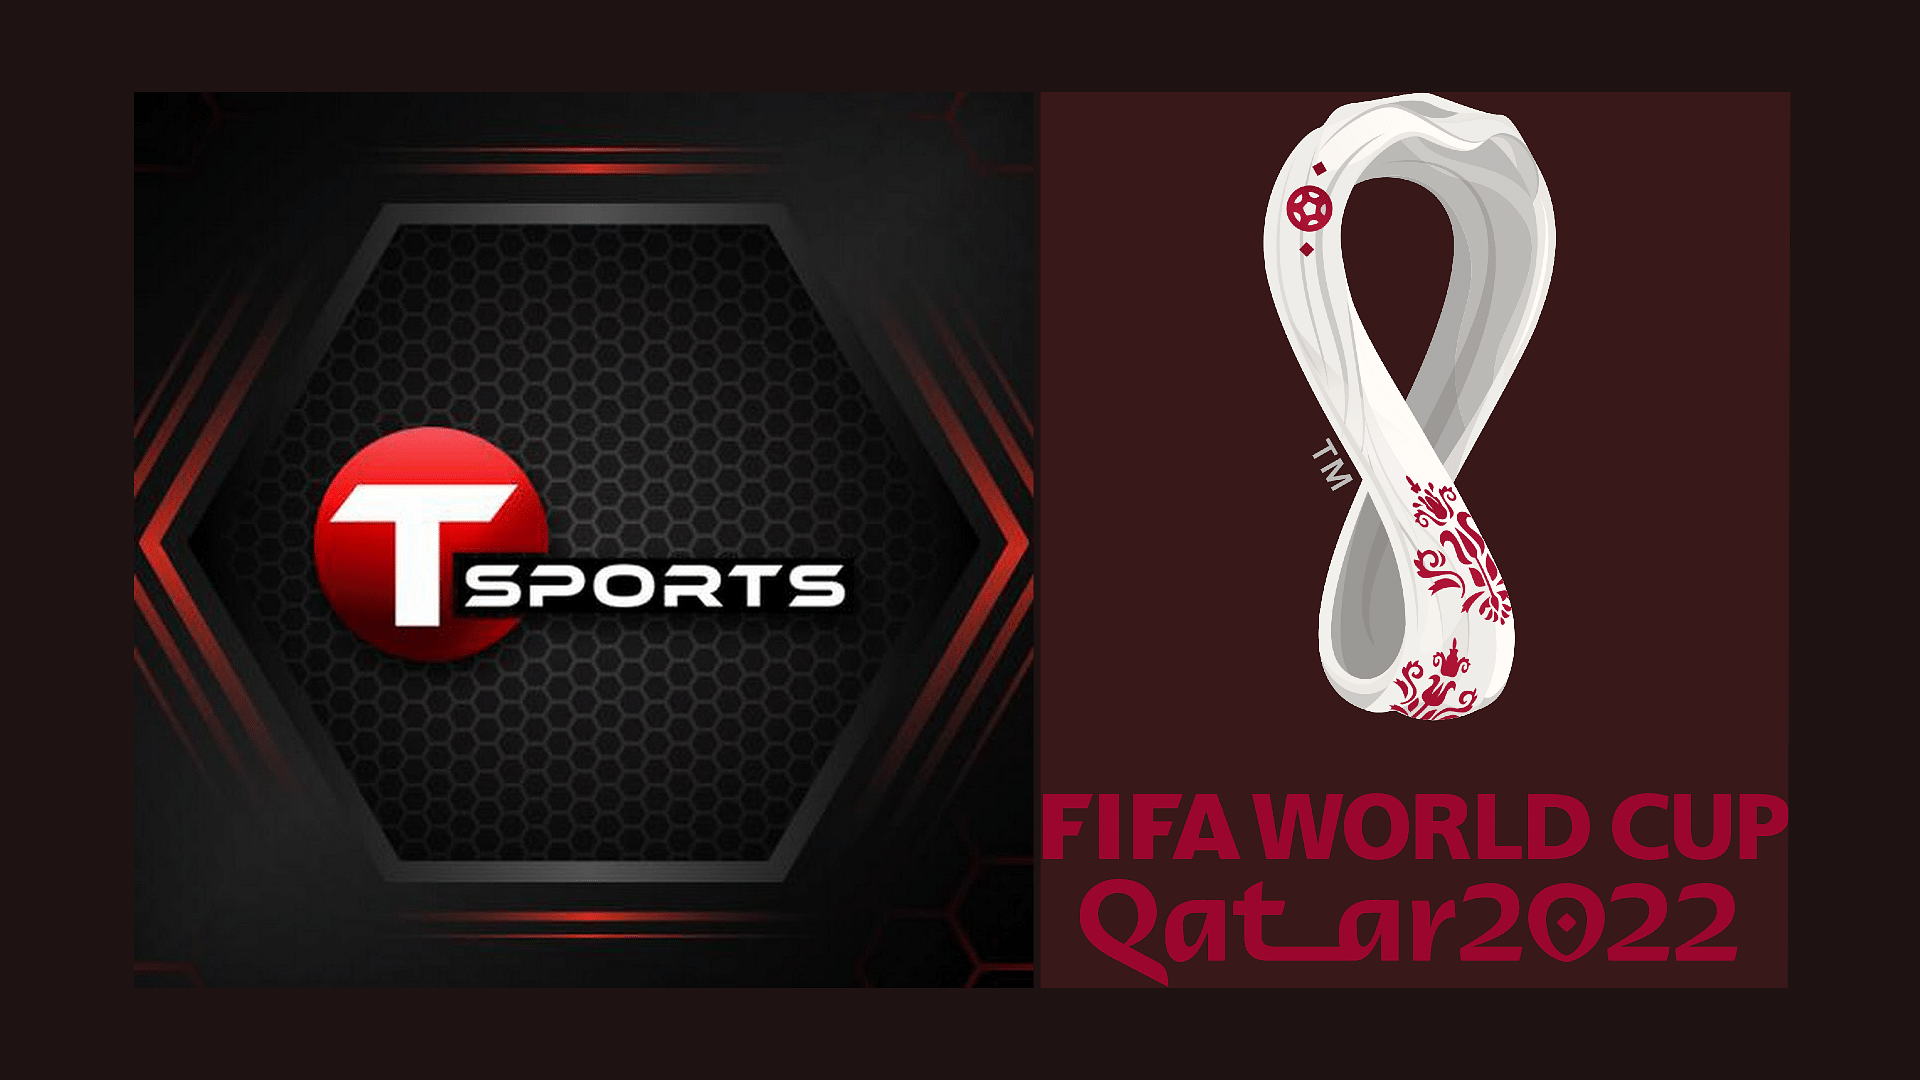 t sports fifa world cup